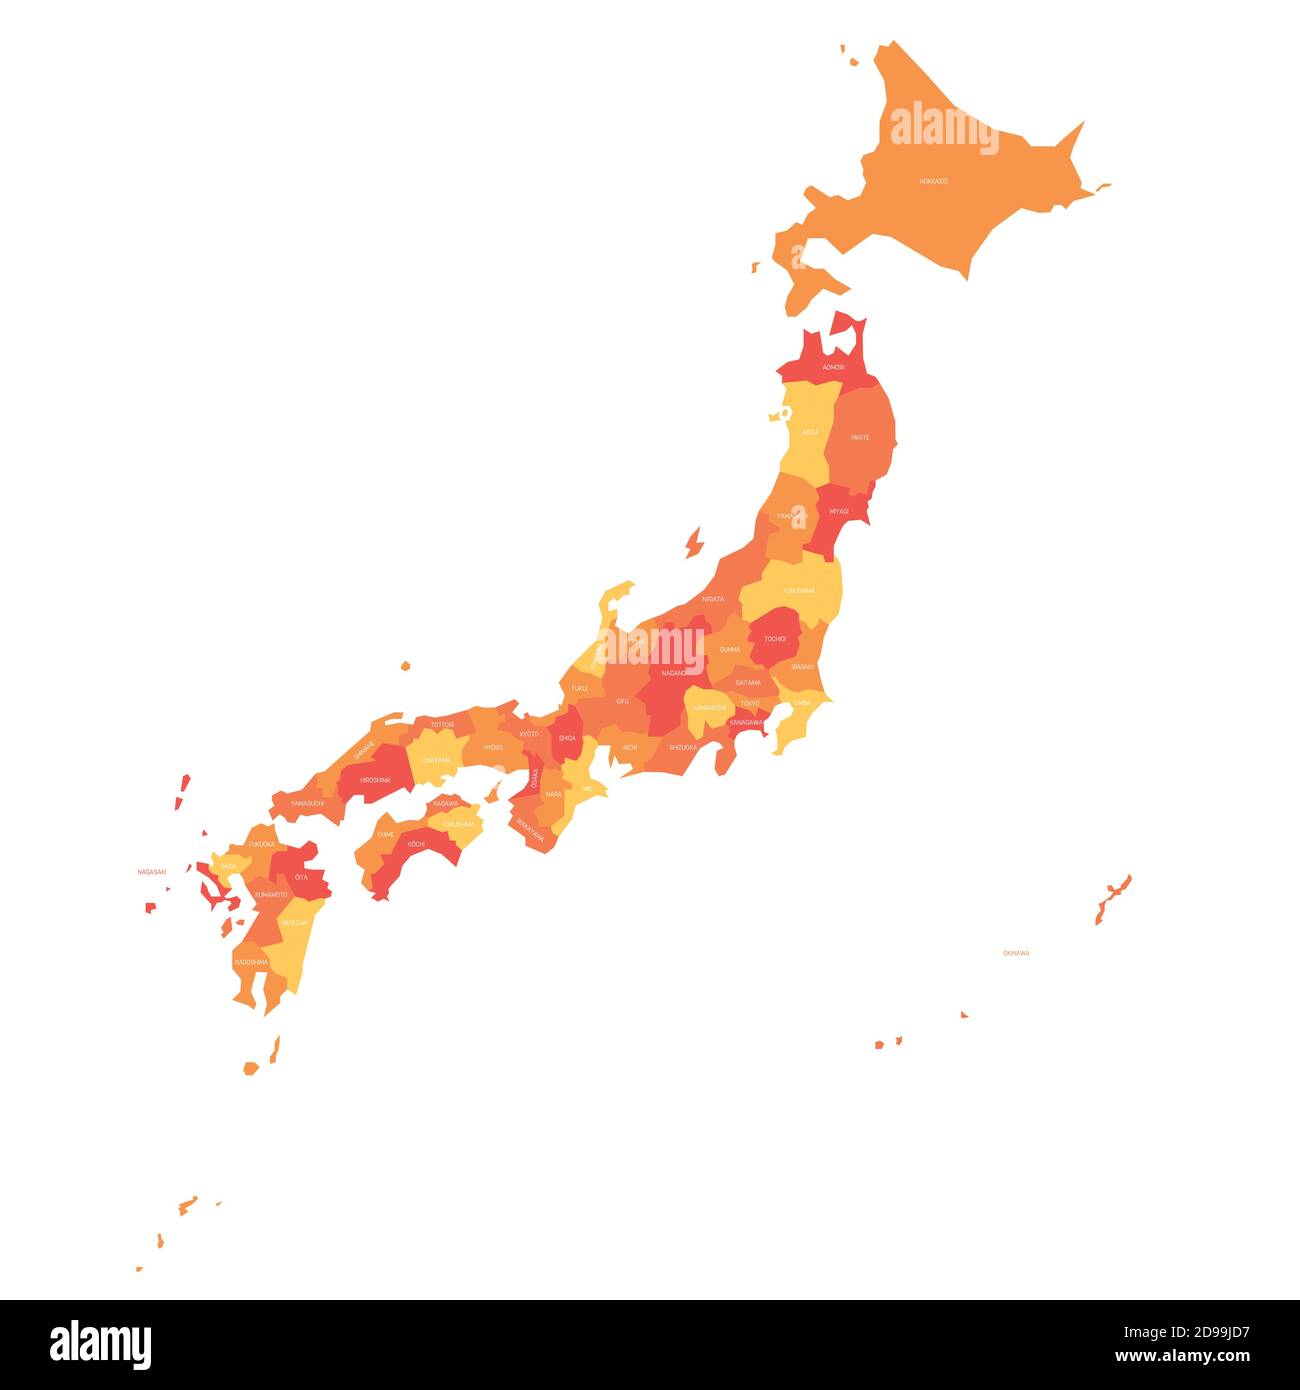 Orange political map of Japan. Administrative divisions - prefectures. Simple flat vector map with labels. Stock Vector